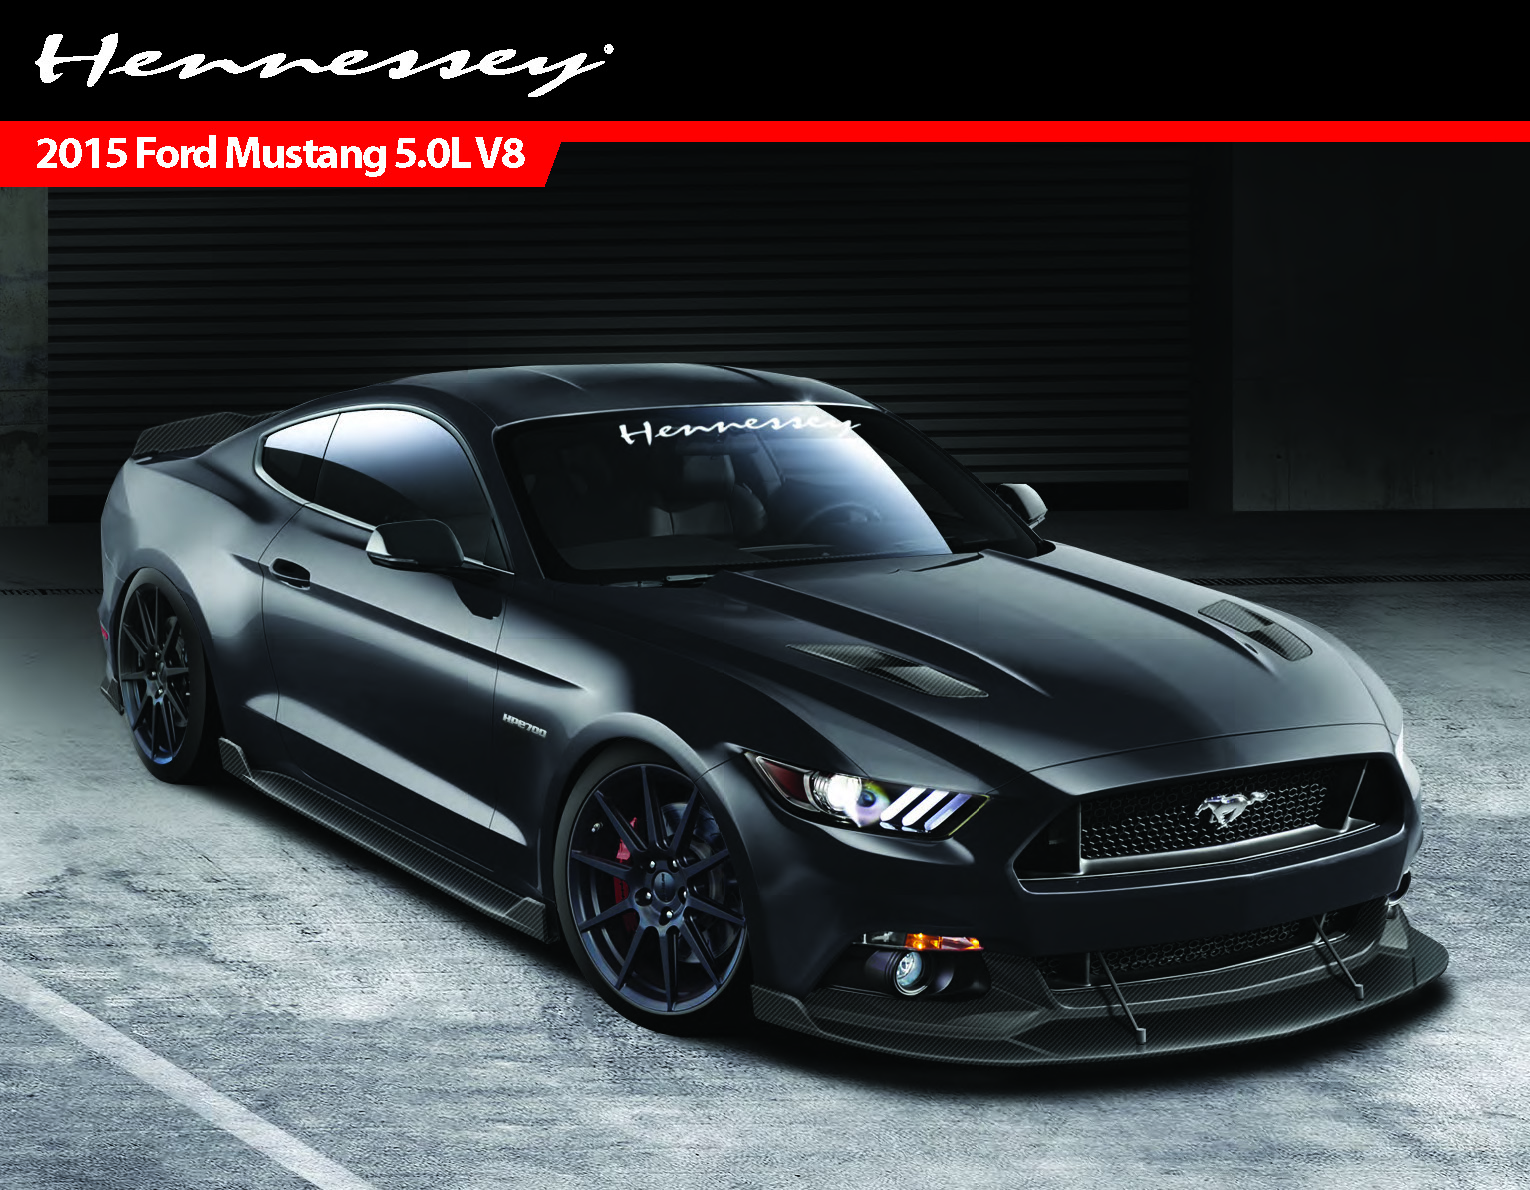 Hennessey_Ford_Mustang-2015-_1